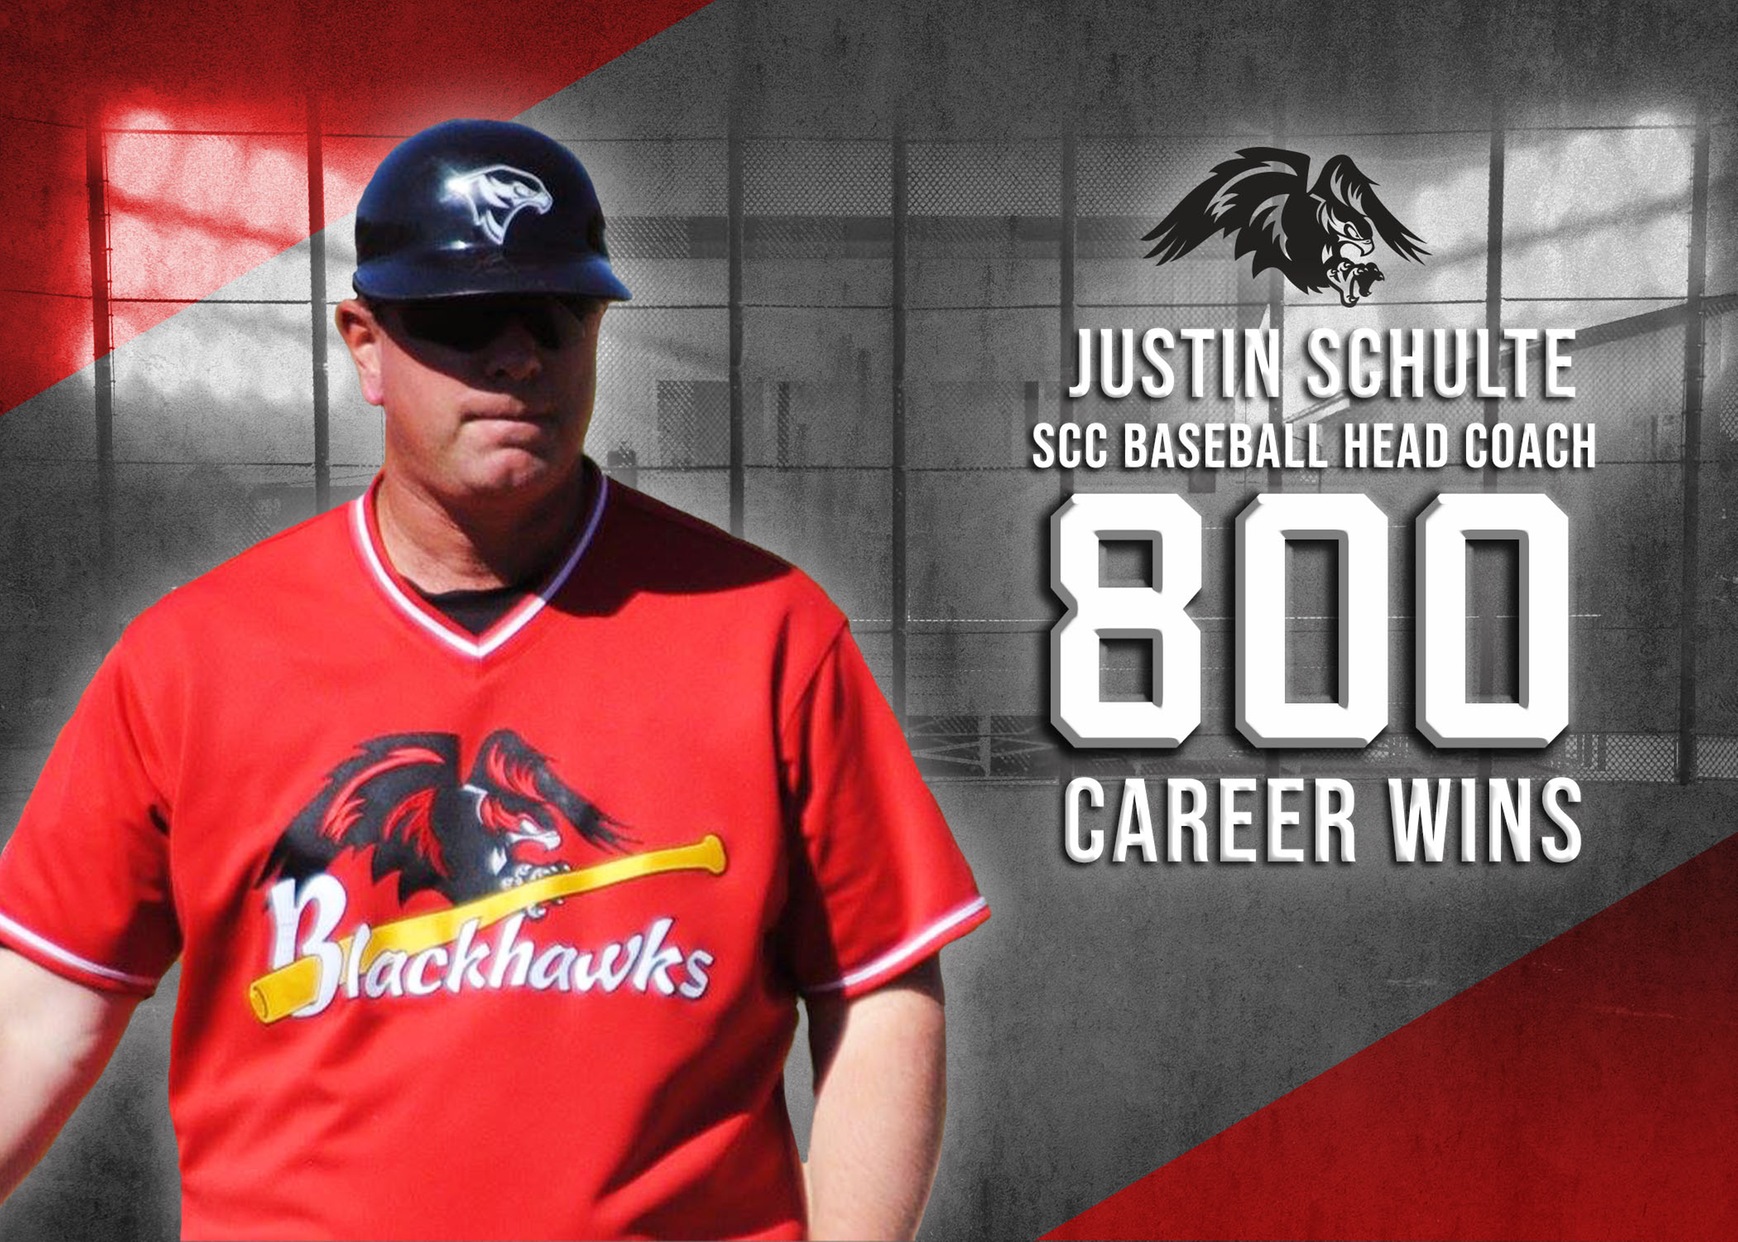 Coach Schulte Earns 800th Career win